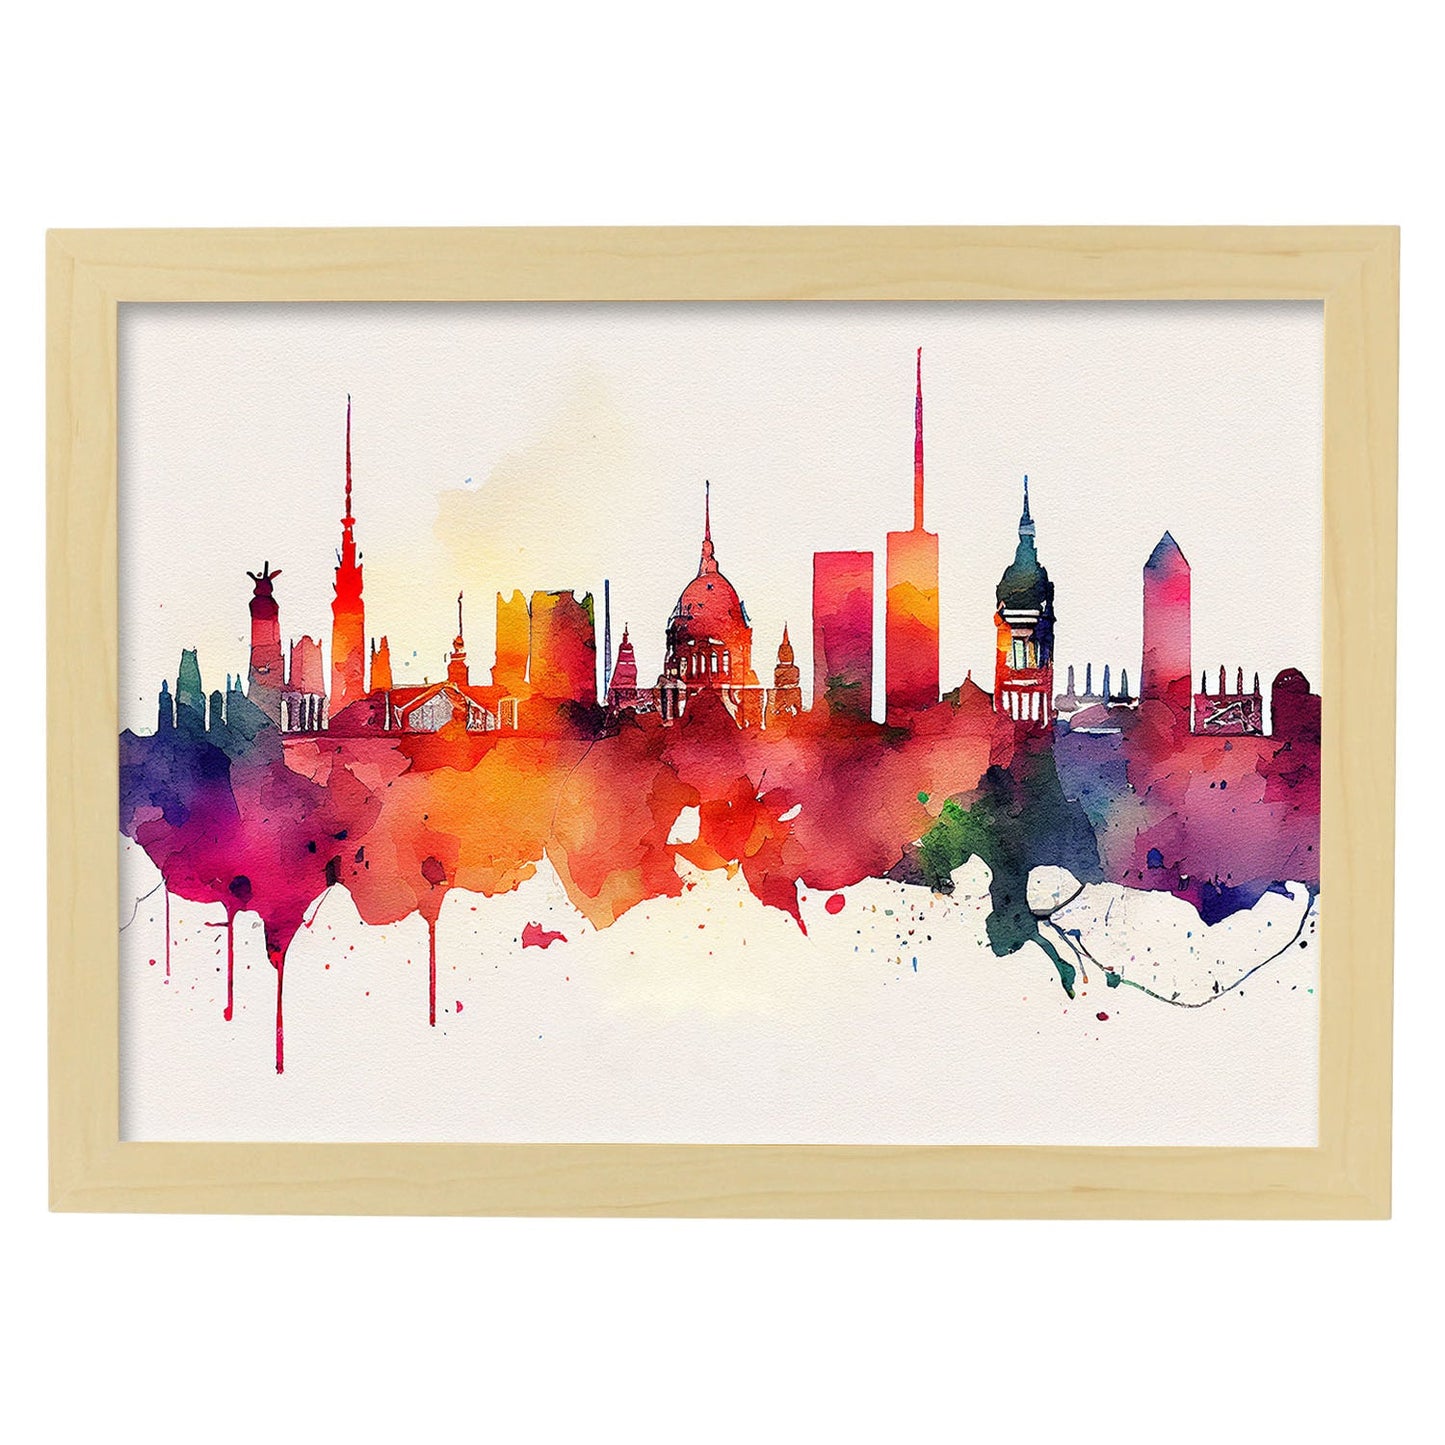 Nacnic watercolor of a skyline of the city of Berlin_3. Aesthetic Wall Art Prints for Bedroom or Living Room Design.-Artwork-Nacnic-A4-Marco Madera Clara-Nacnic Estudio SL